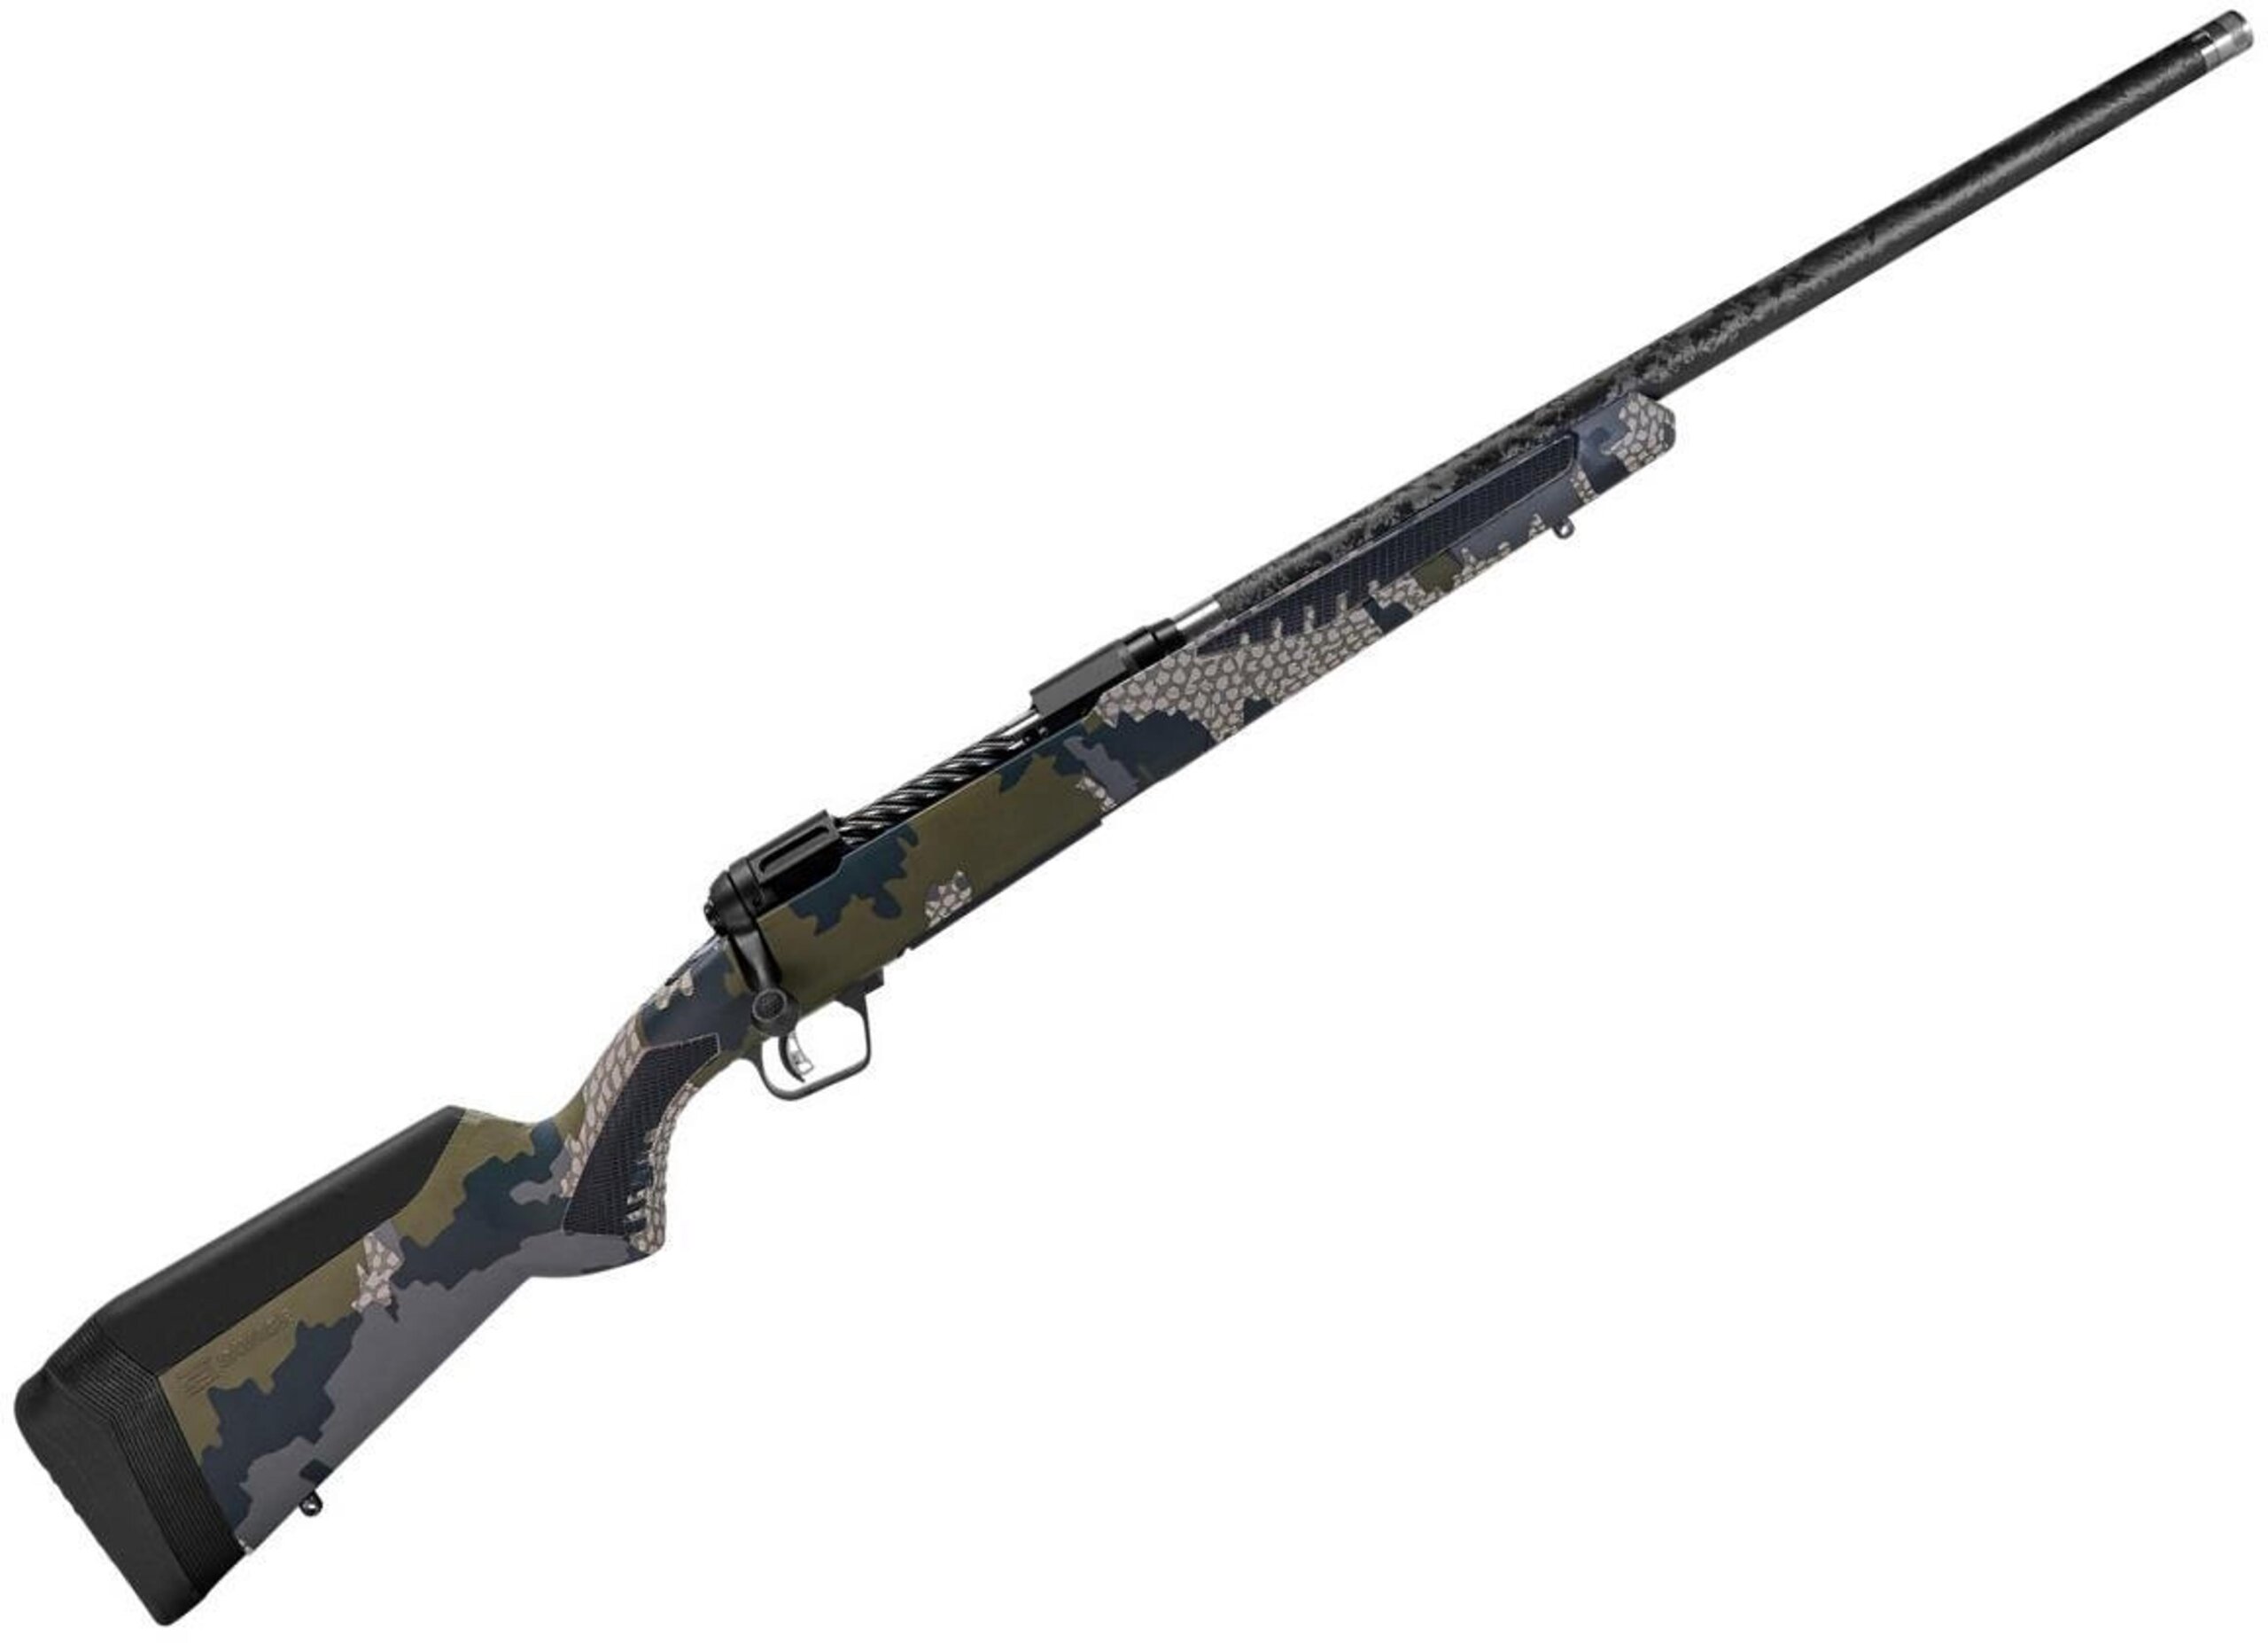 Savage 58019 110 Ultralite Camo 28 Nosler 24 in Black Carbon Fiber BBL, Camouflage Savage Woodland Camo Synthetic Stock, 0685-2637